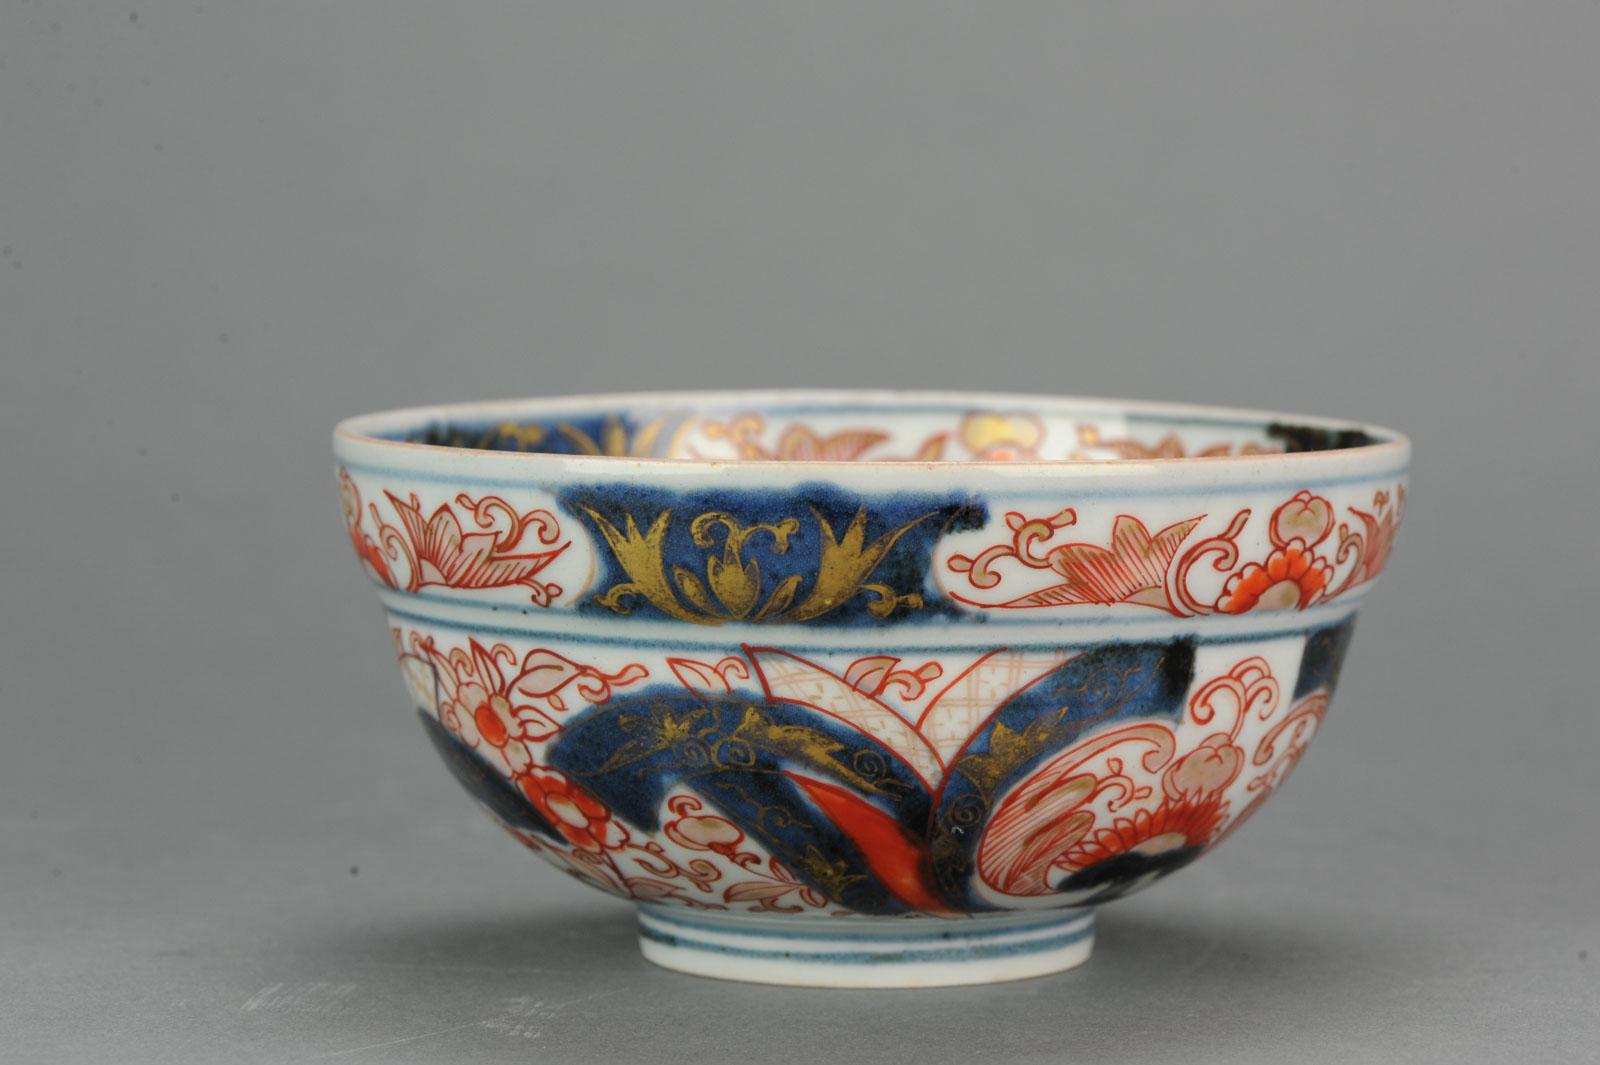 For similar decorated pieces see: Reichel - 